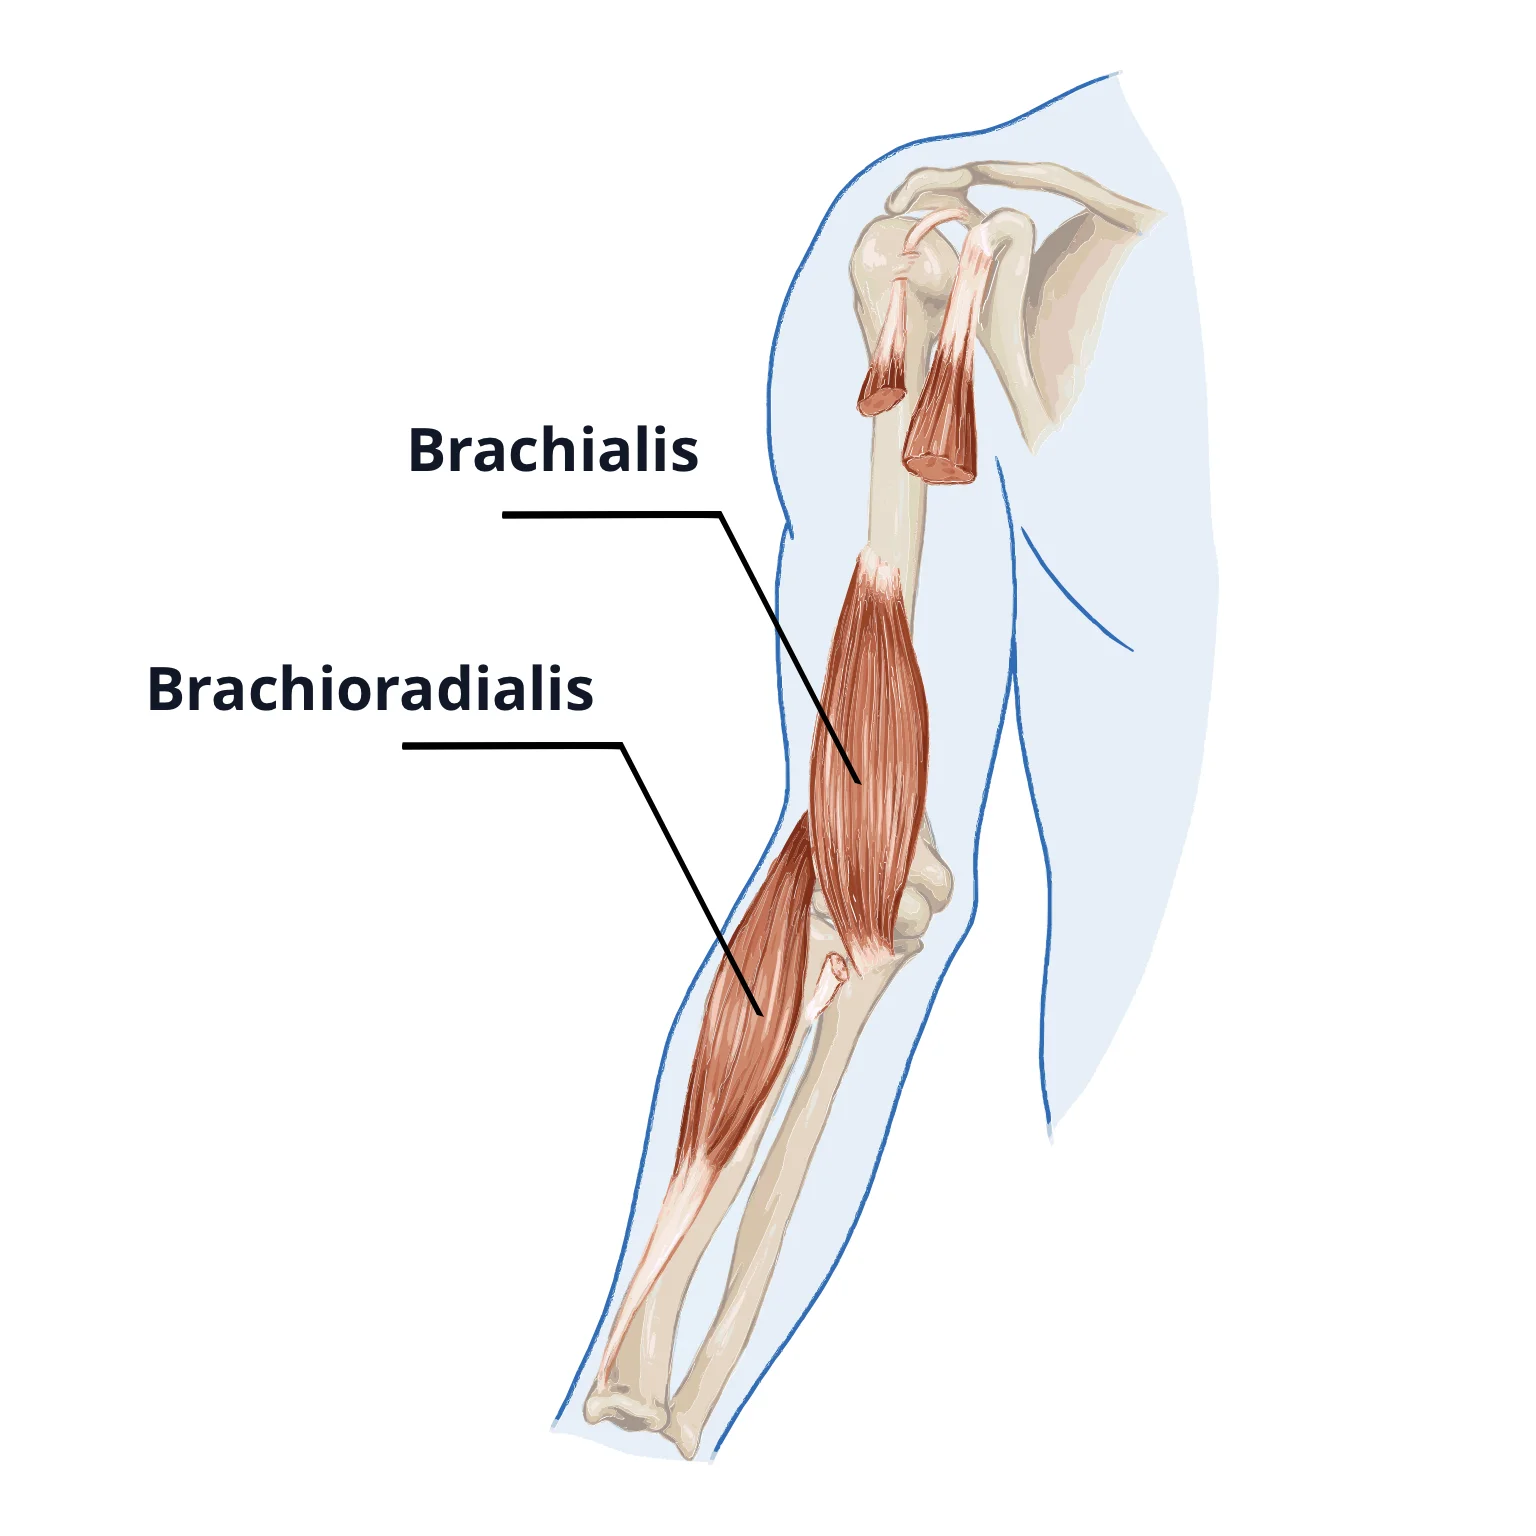 Diagram showing the location of the brachialis and brachioradialis